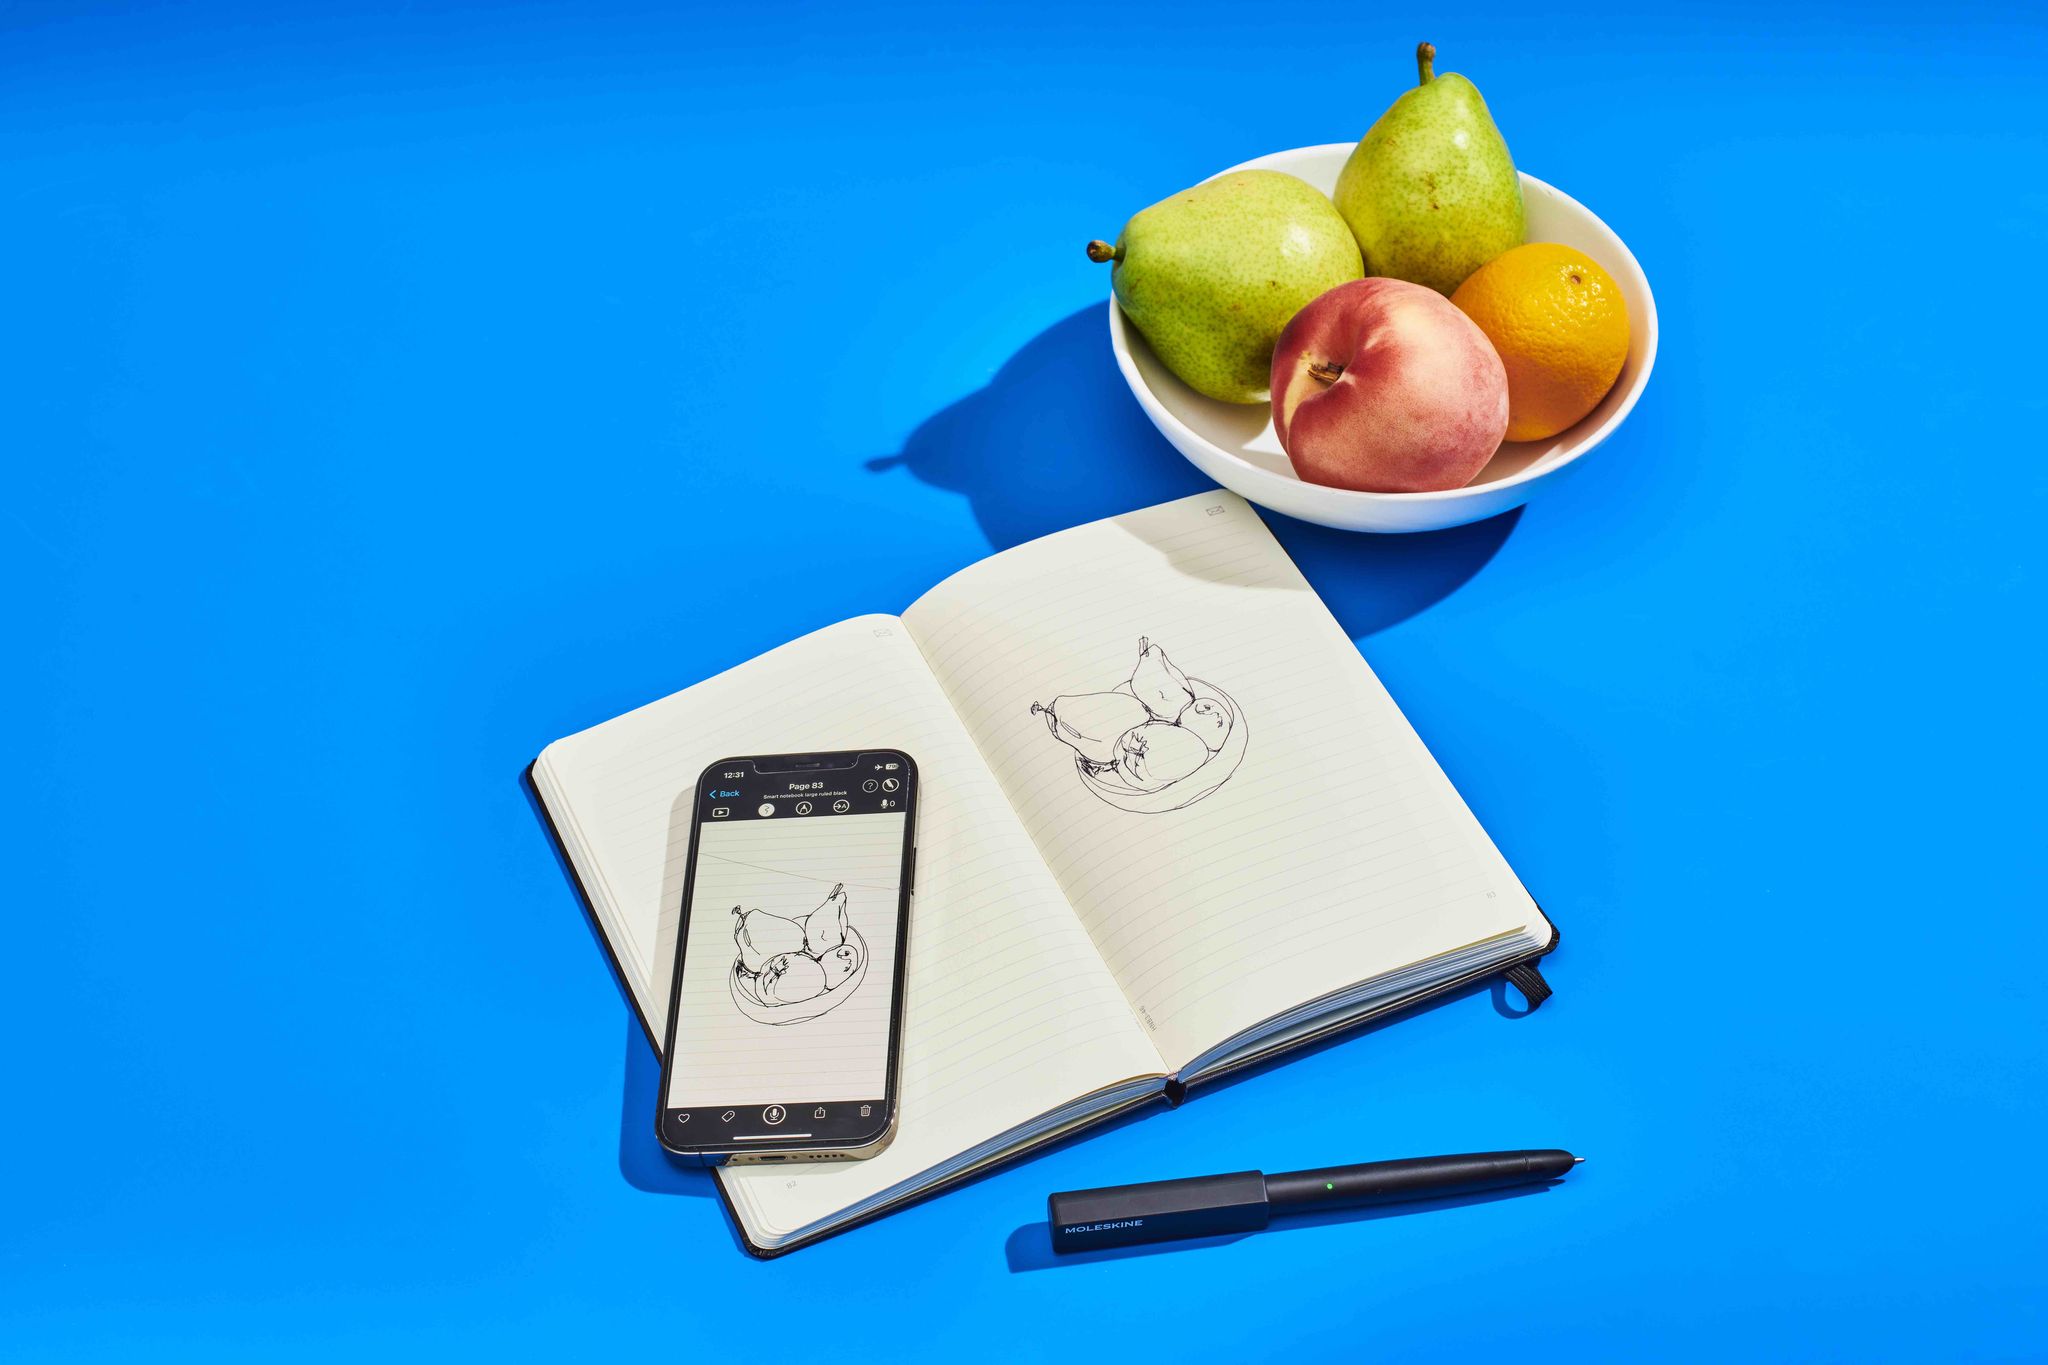 Review: The Moleskine Smart Writing Set turns written words into